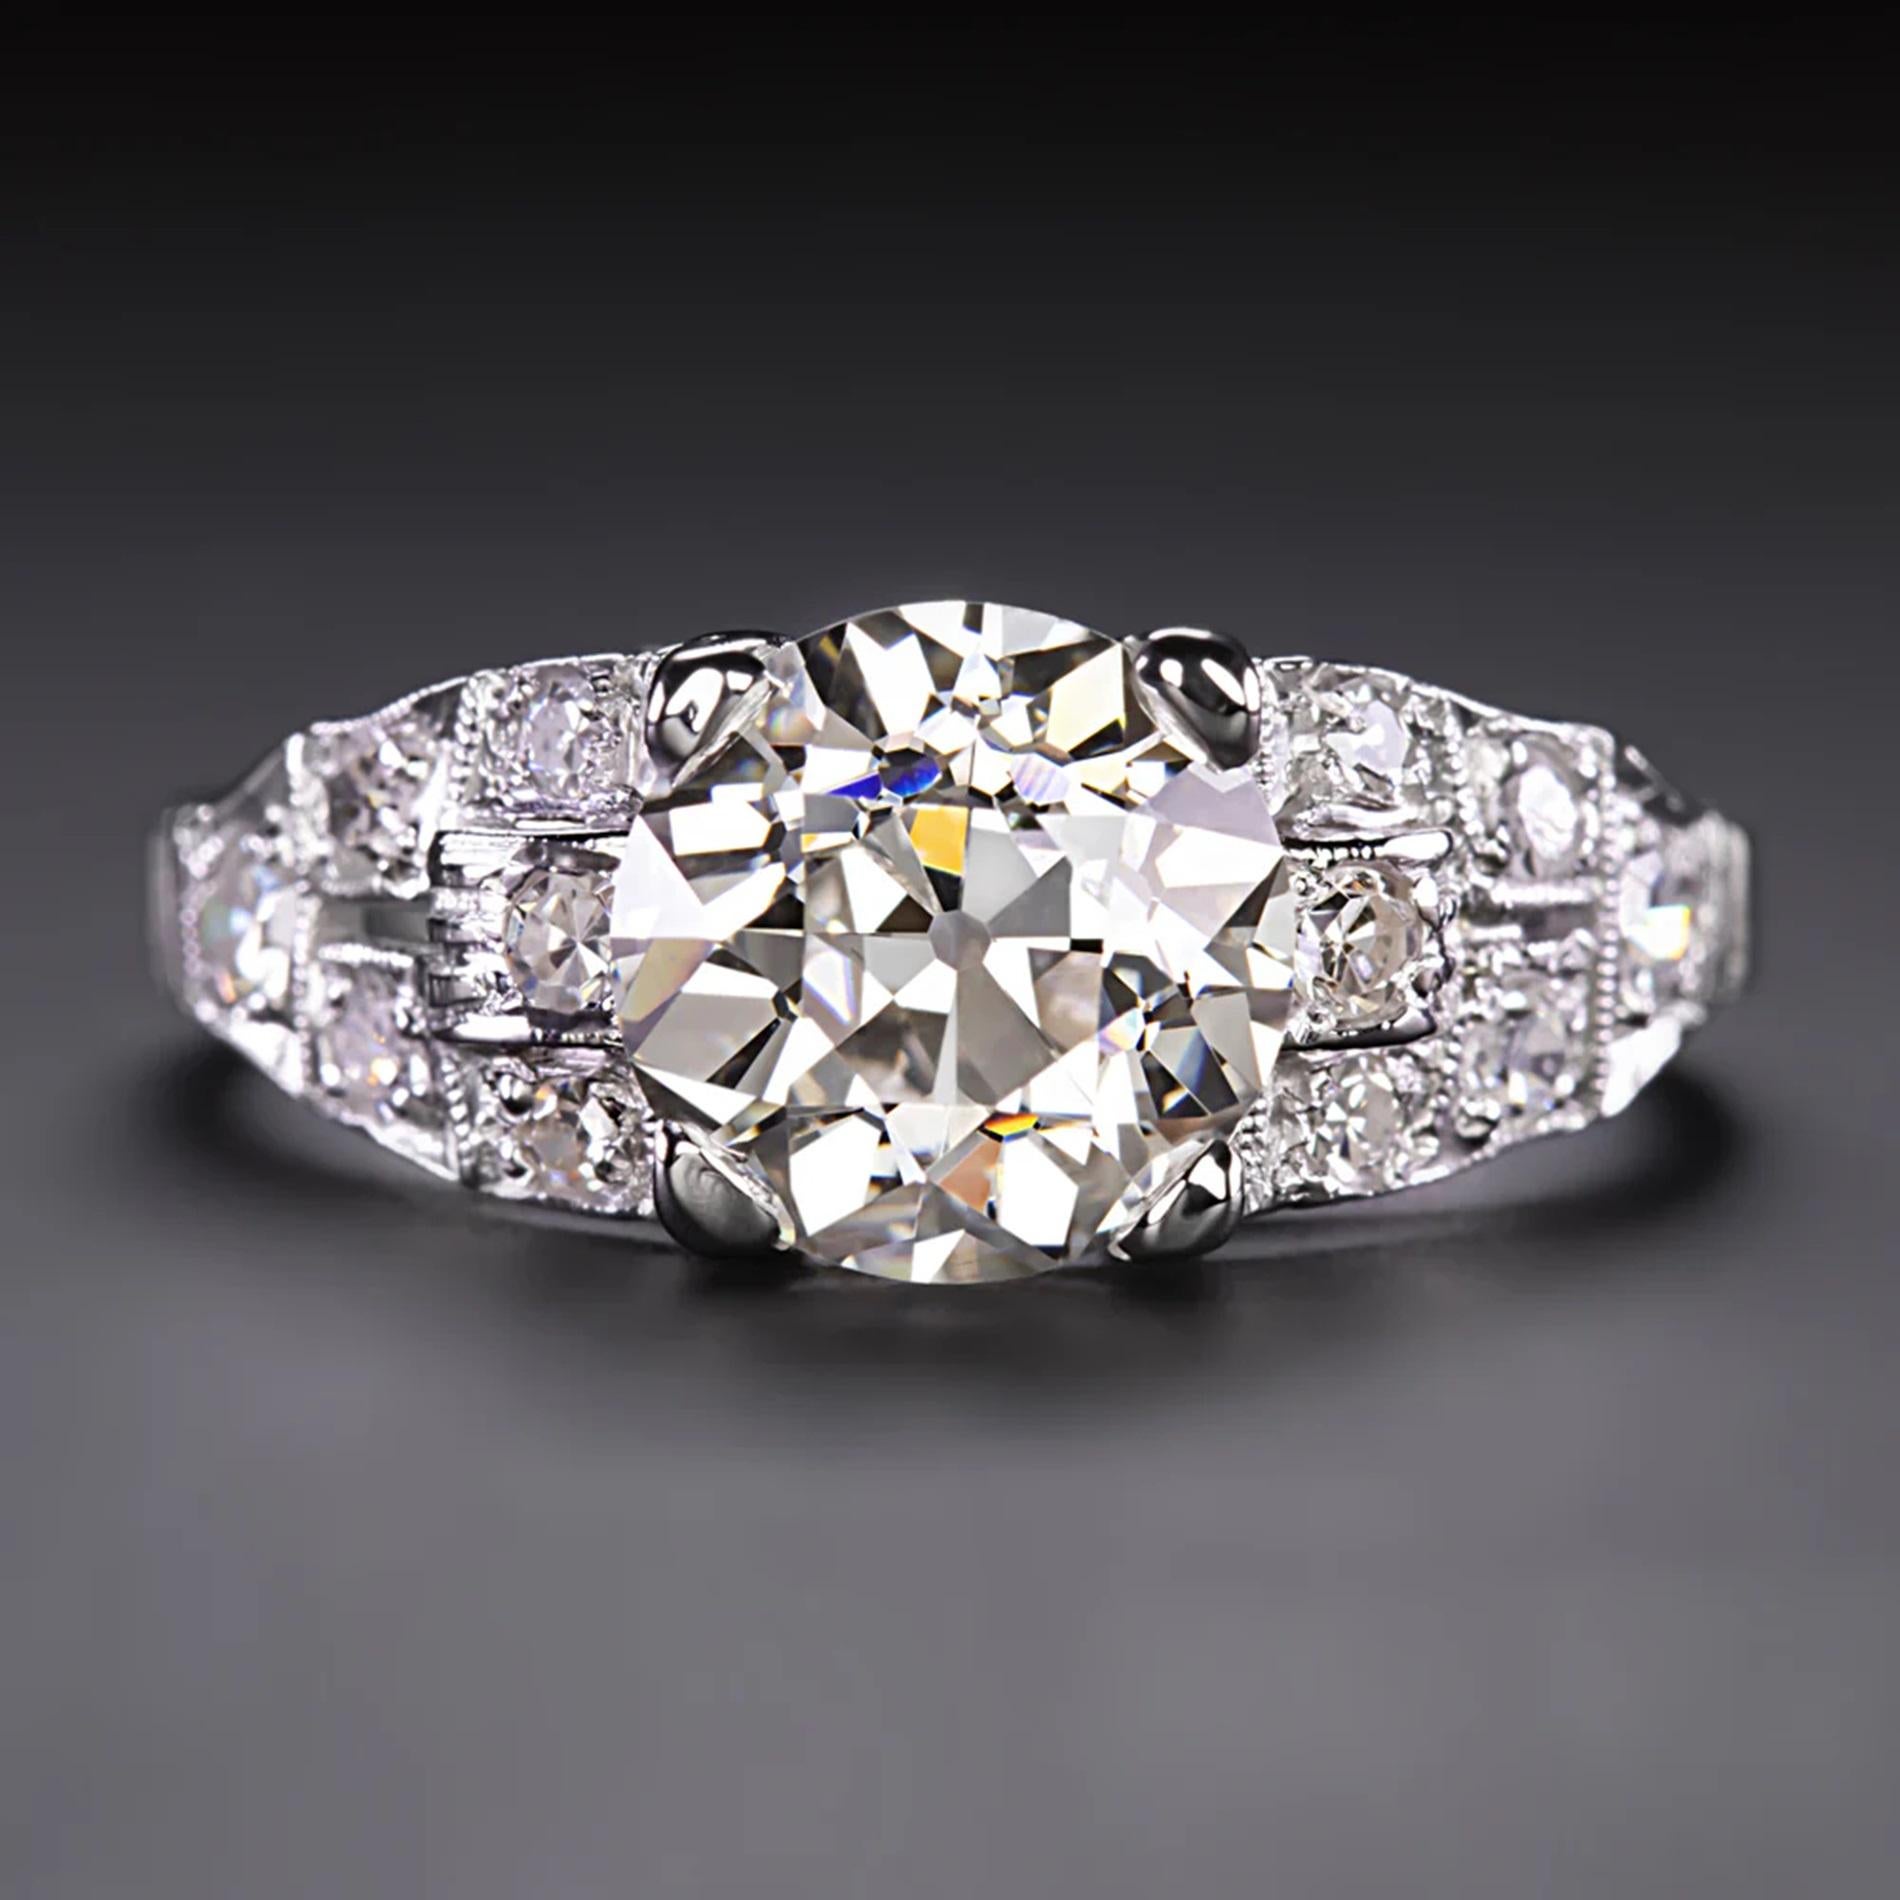  1920 European Cut Art Deco Vintage Diamond Cocktail Ring   In Excellent Condition For Sale In Rome, IT